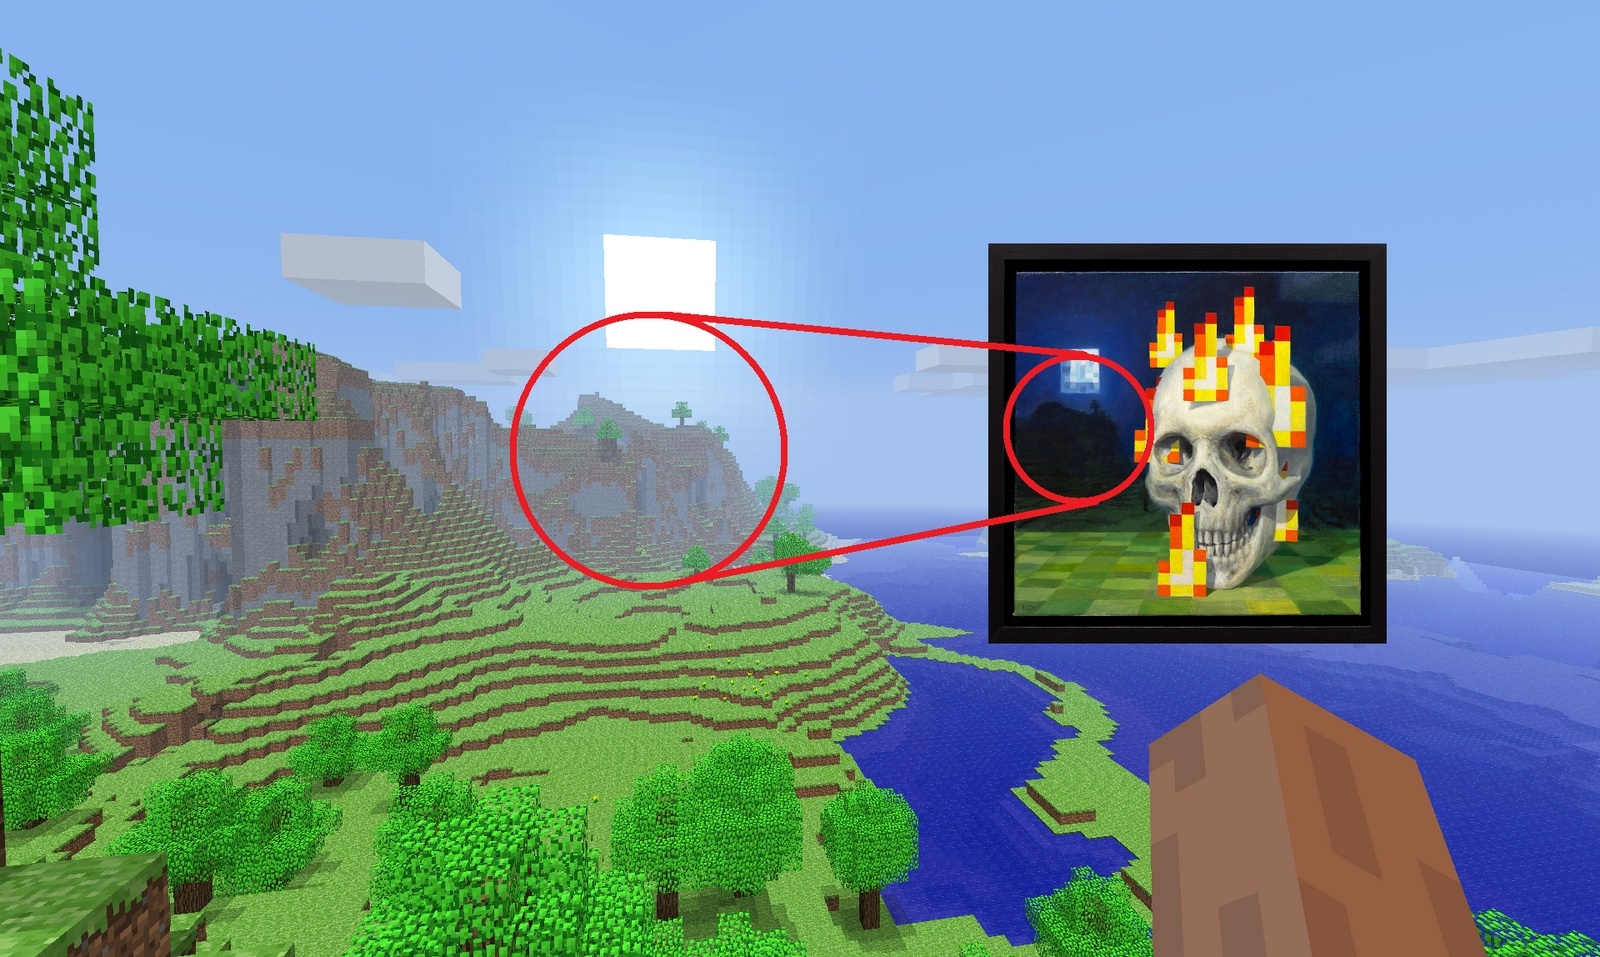 The Skull on Fire painting on top of the actual world for the painting with the mountain in the distance